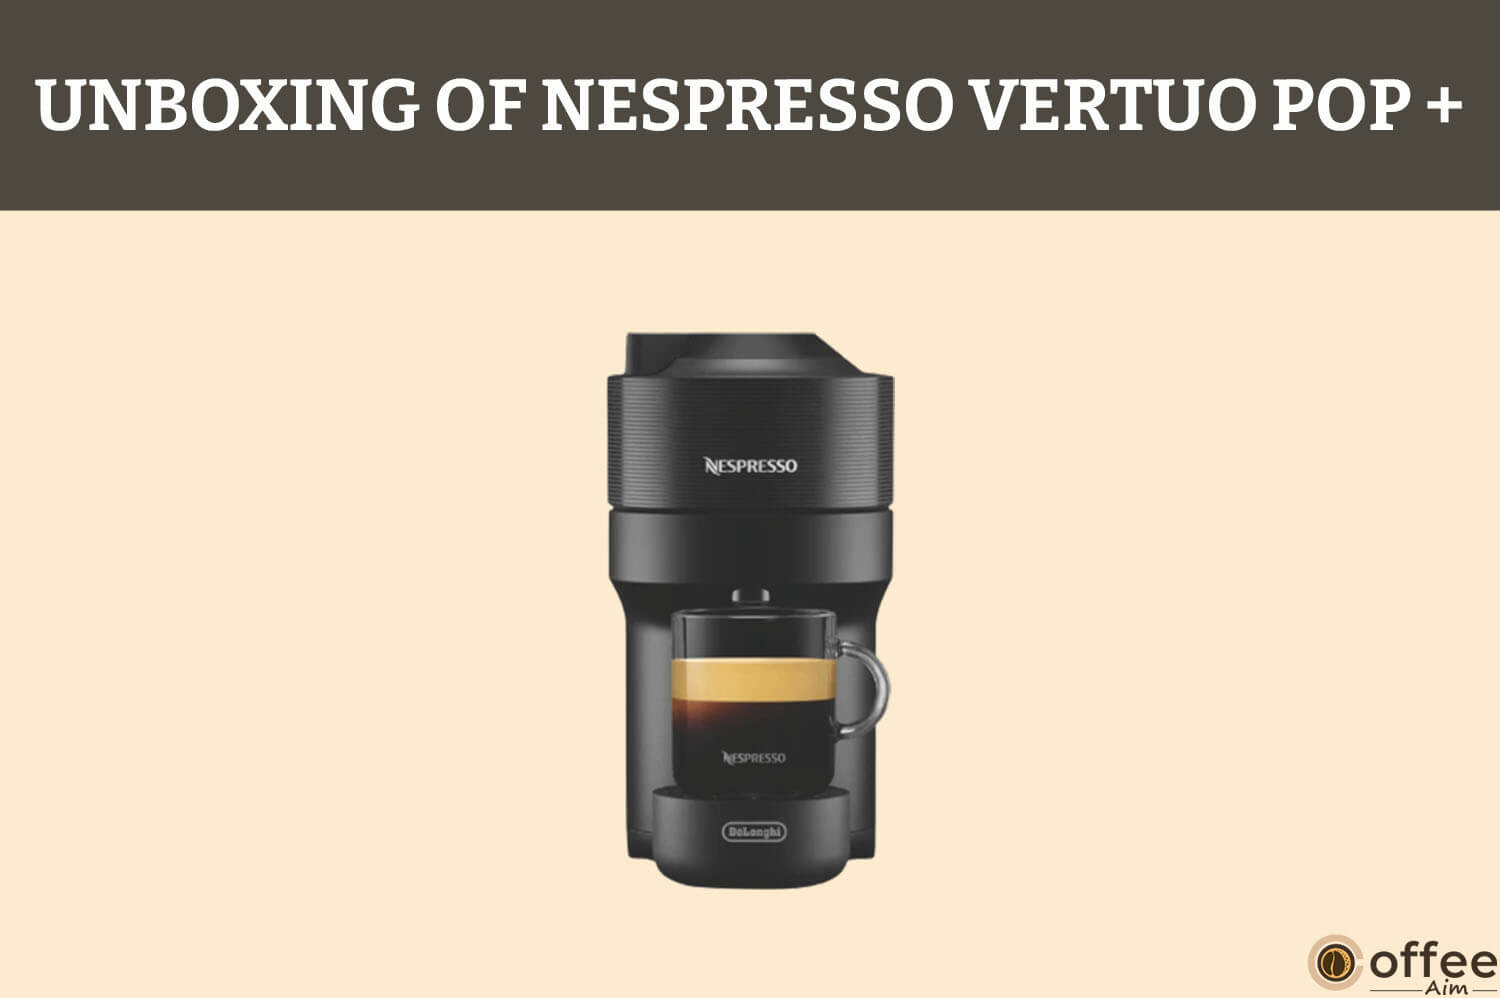 Featured image for the article "Unboxing Nespresso Vertuo Pop +"